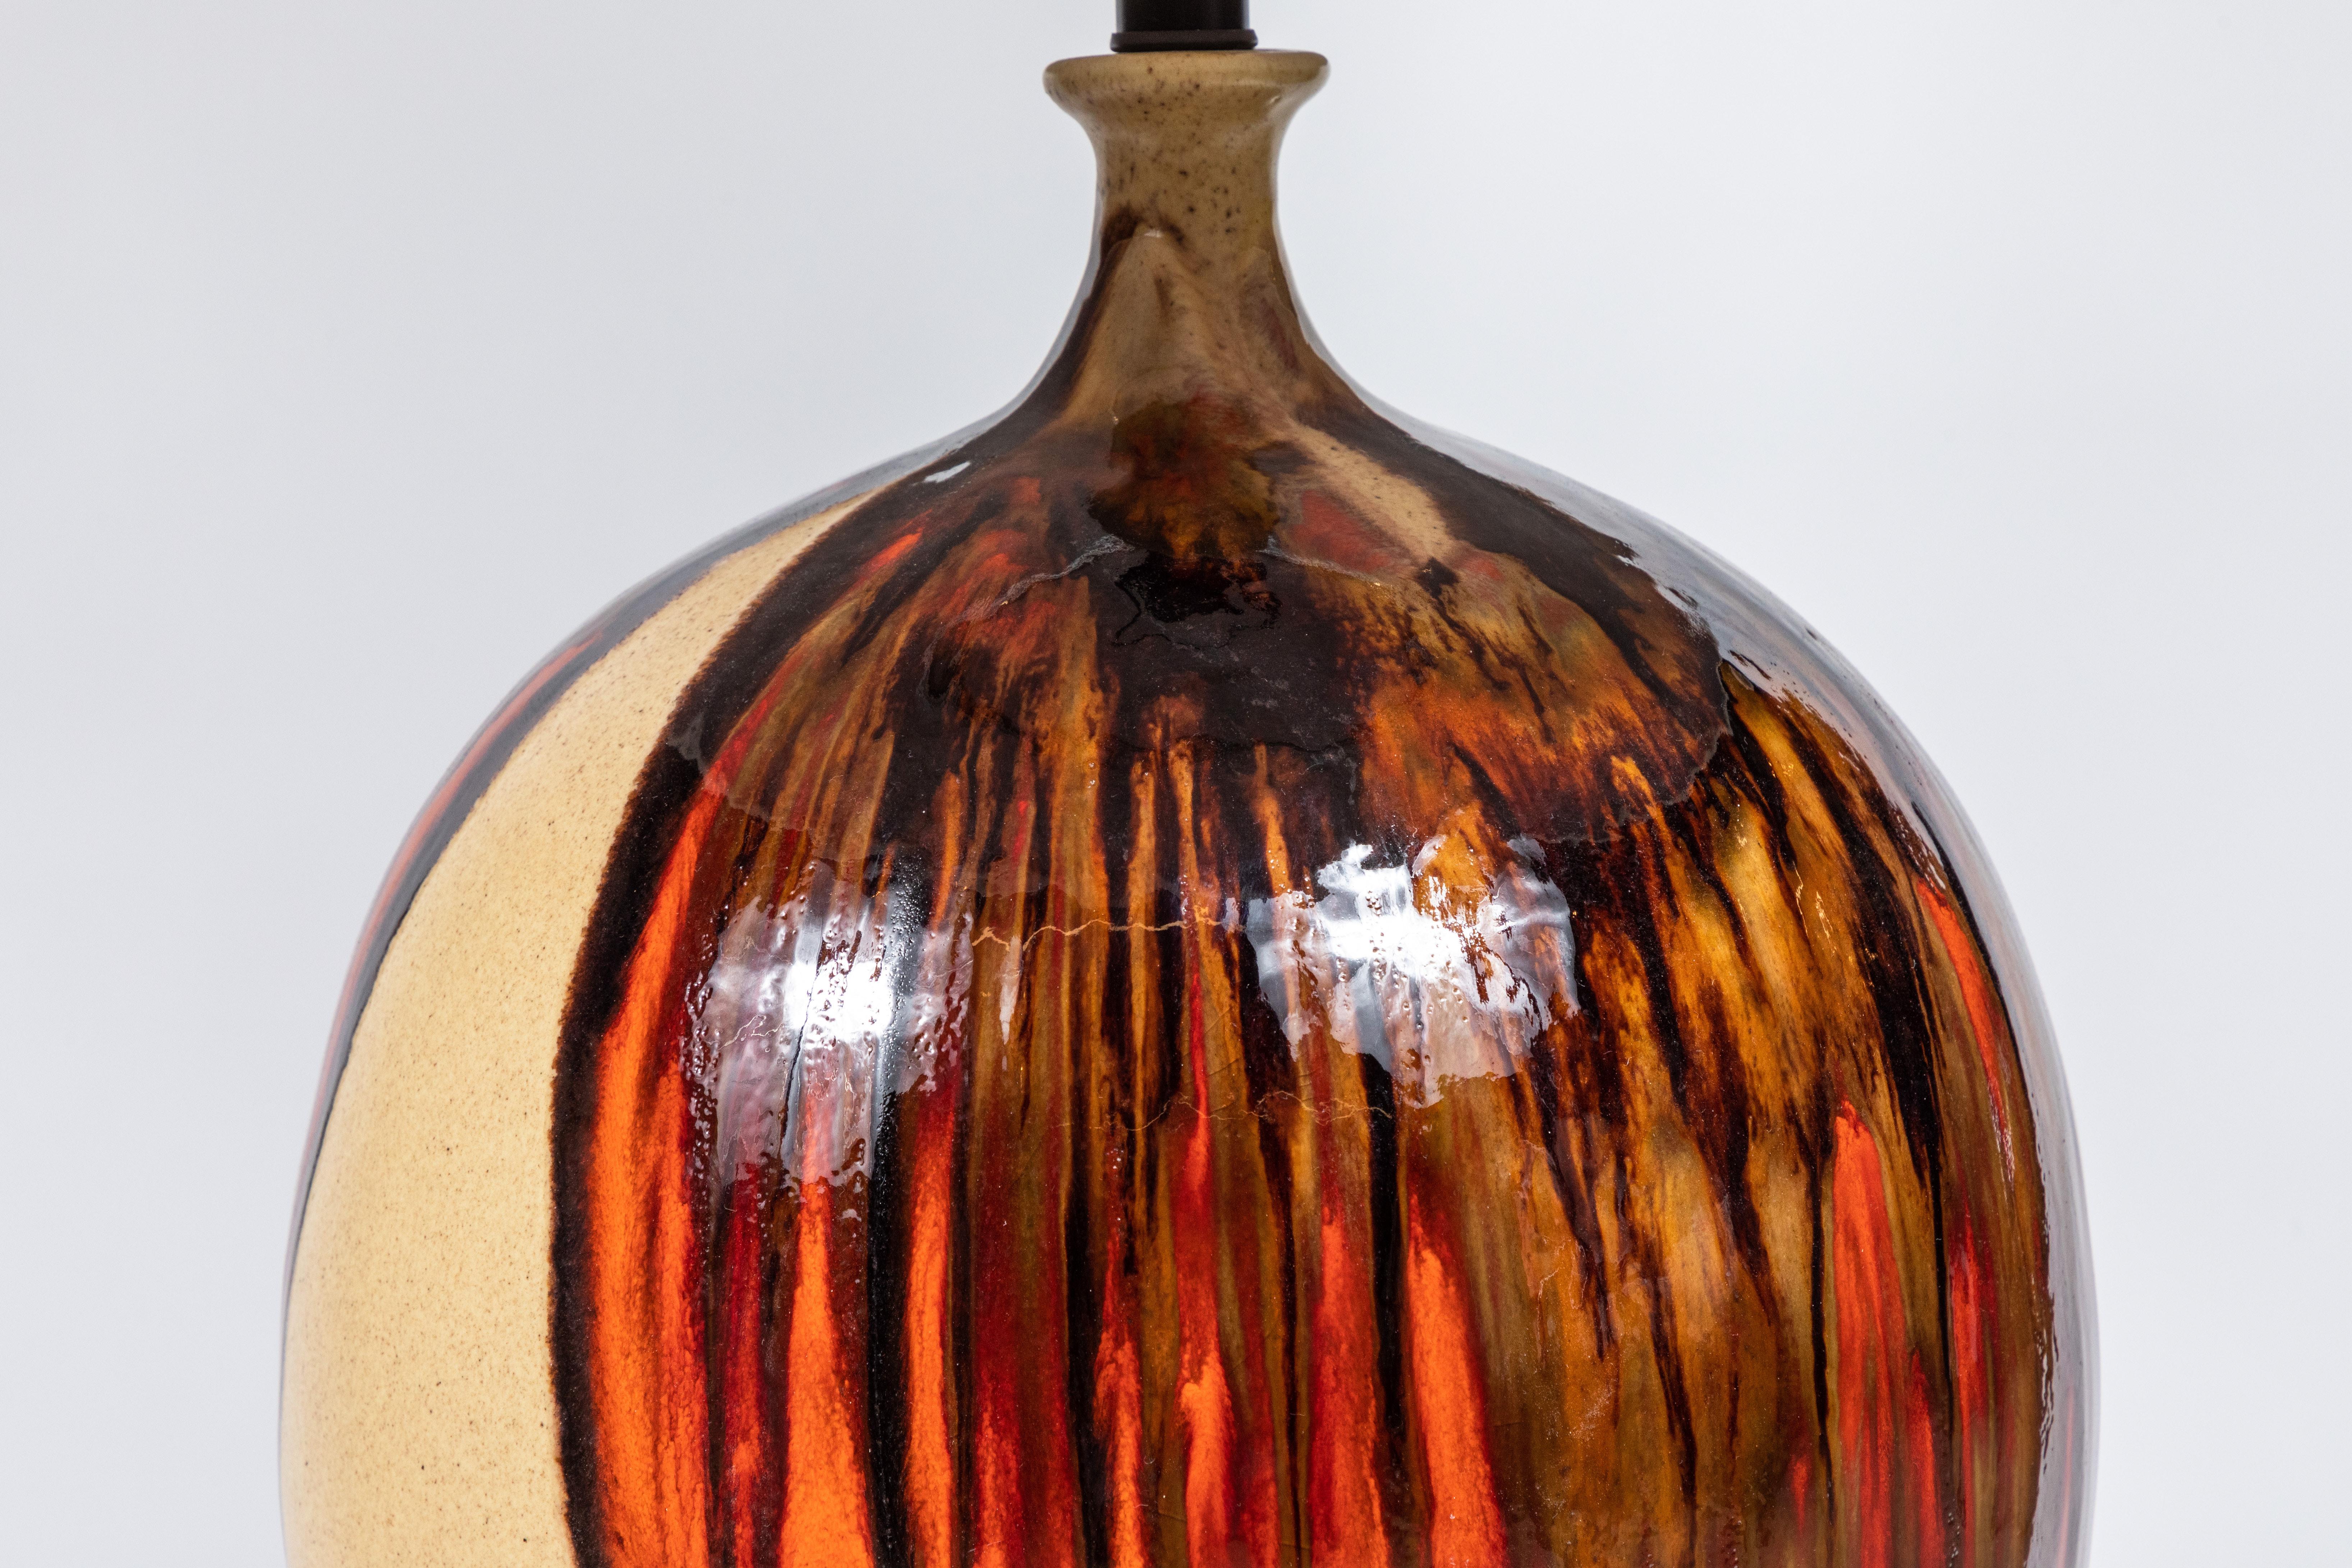 20th Century Midcentury Ceramic Lamp in Drip Glaze in Browns and Orange with Custom Shade